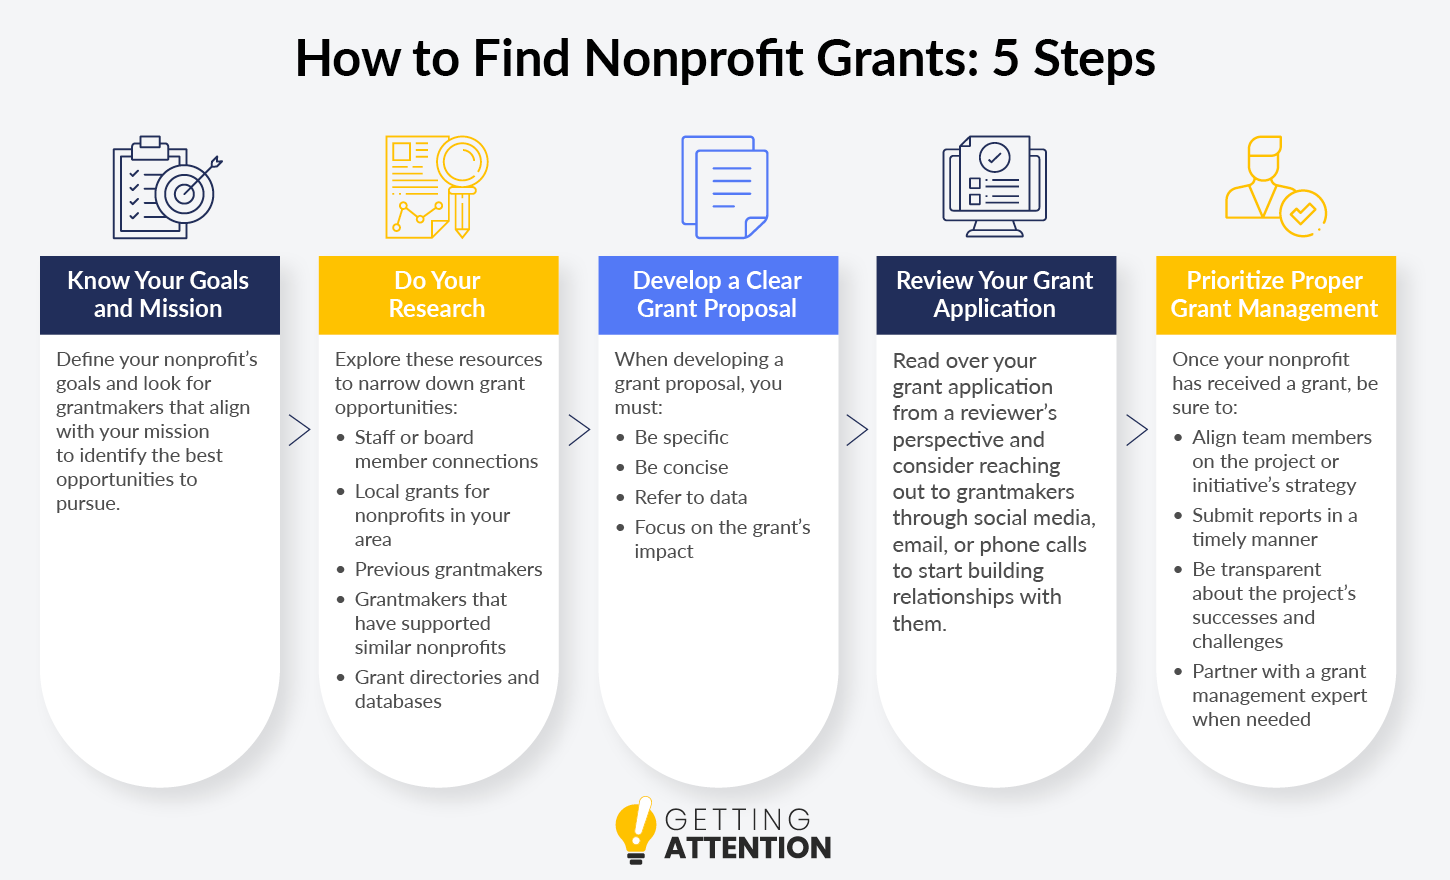 Follow these five steps on how to find grants for nonprofits, detailed below.